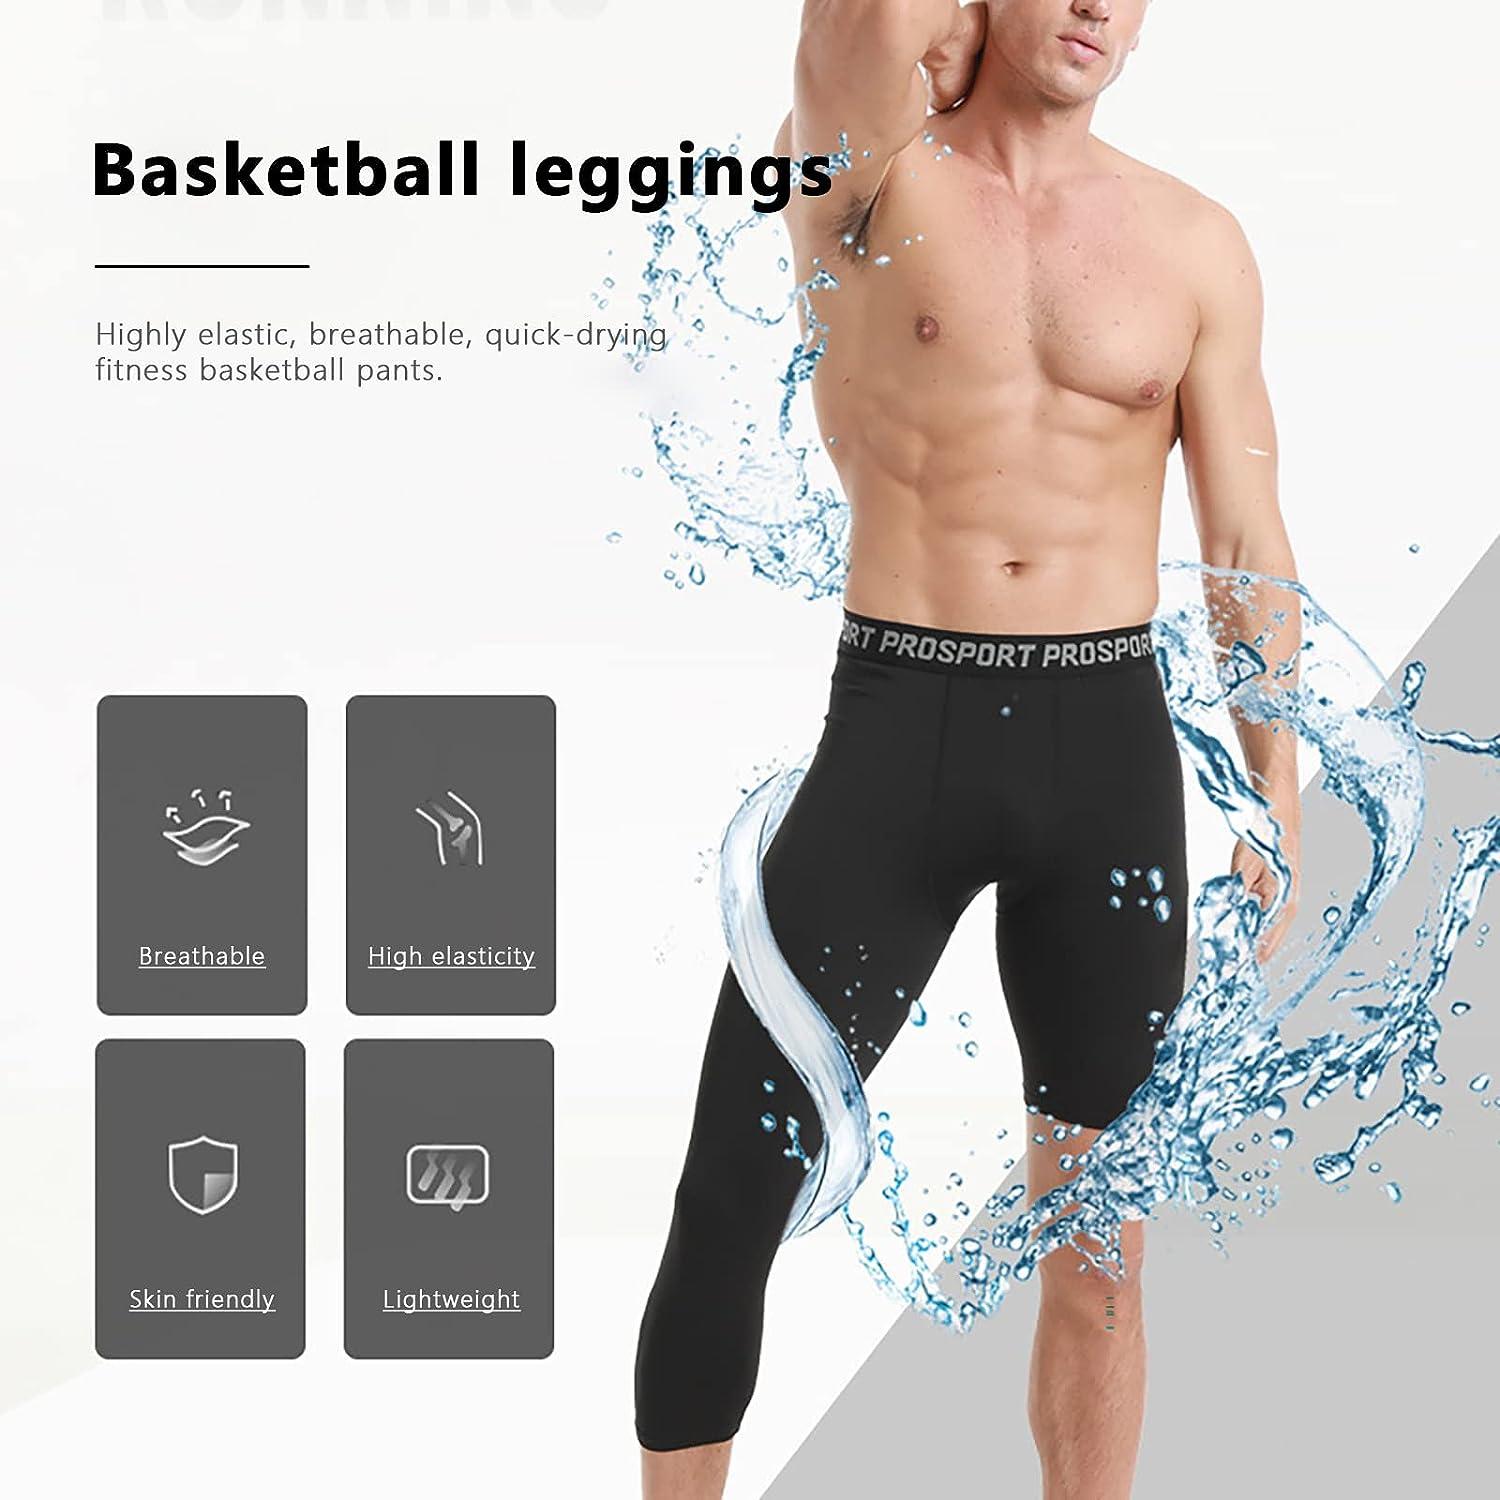 Compression Tights Pants Breathable Sports Trouser Basketball Running Men's  Leggings